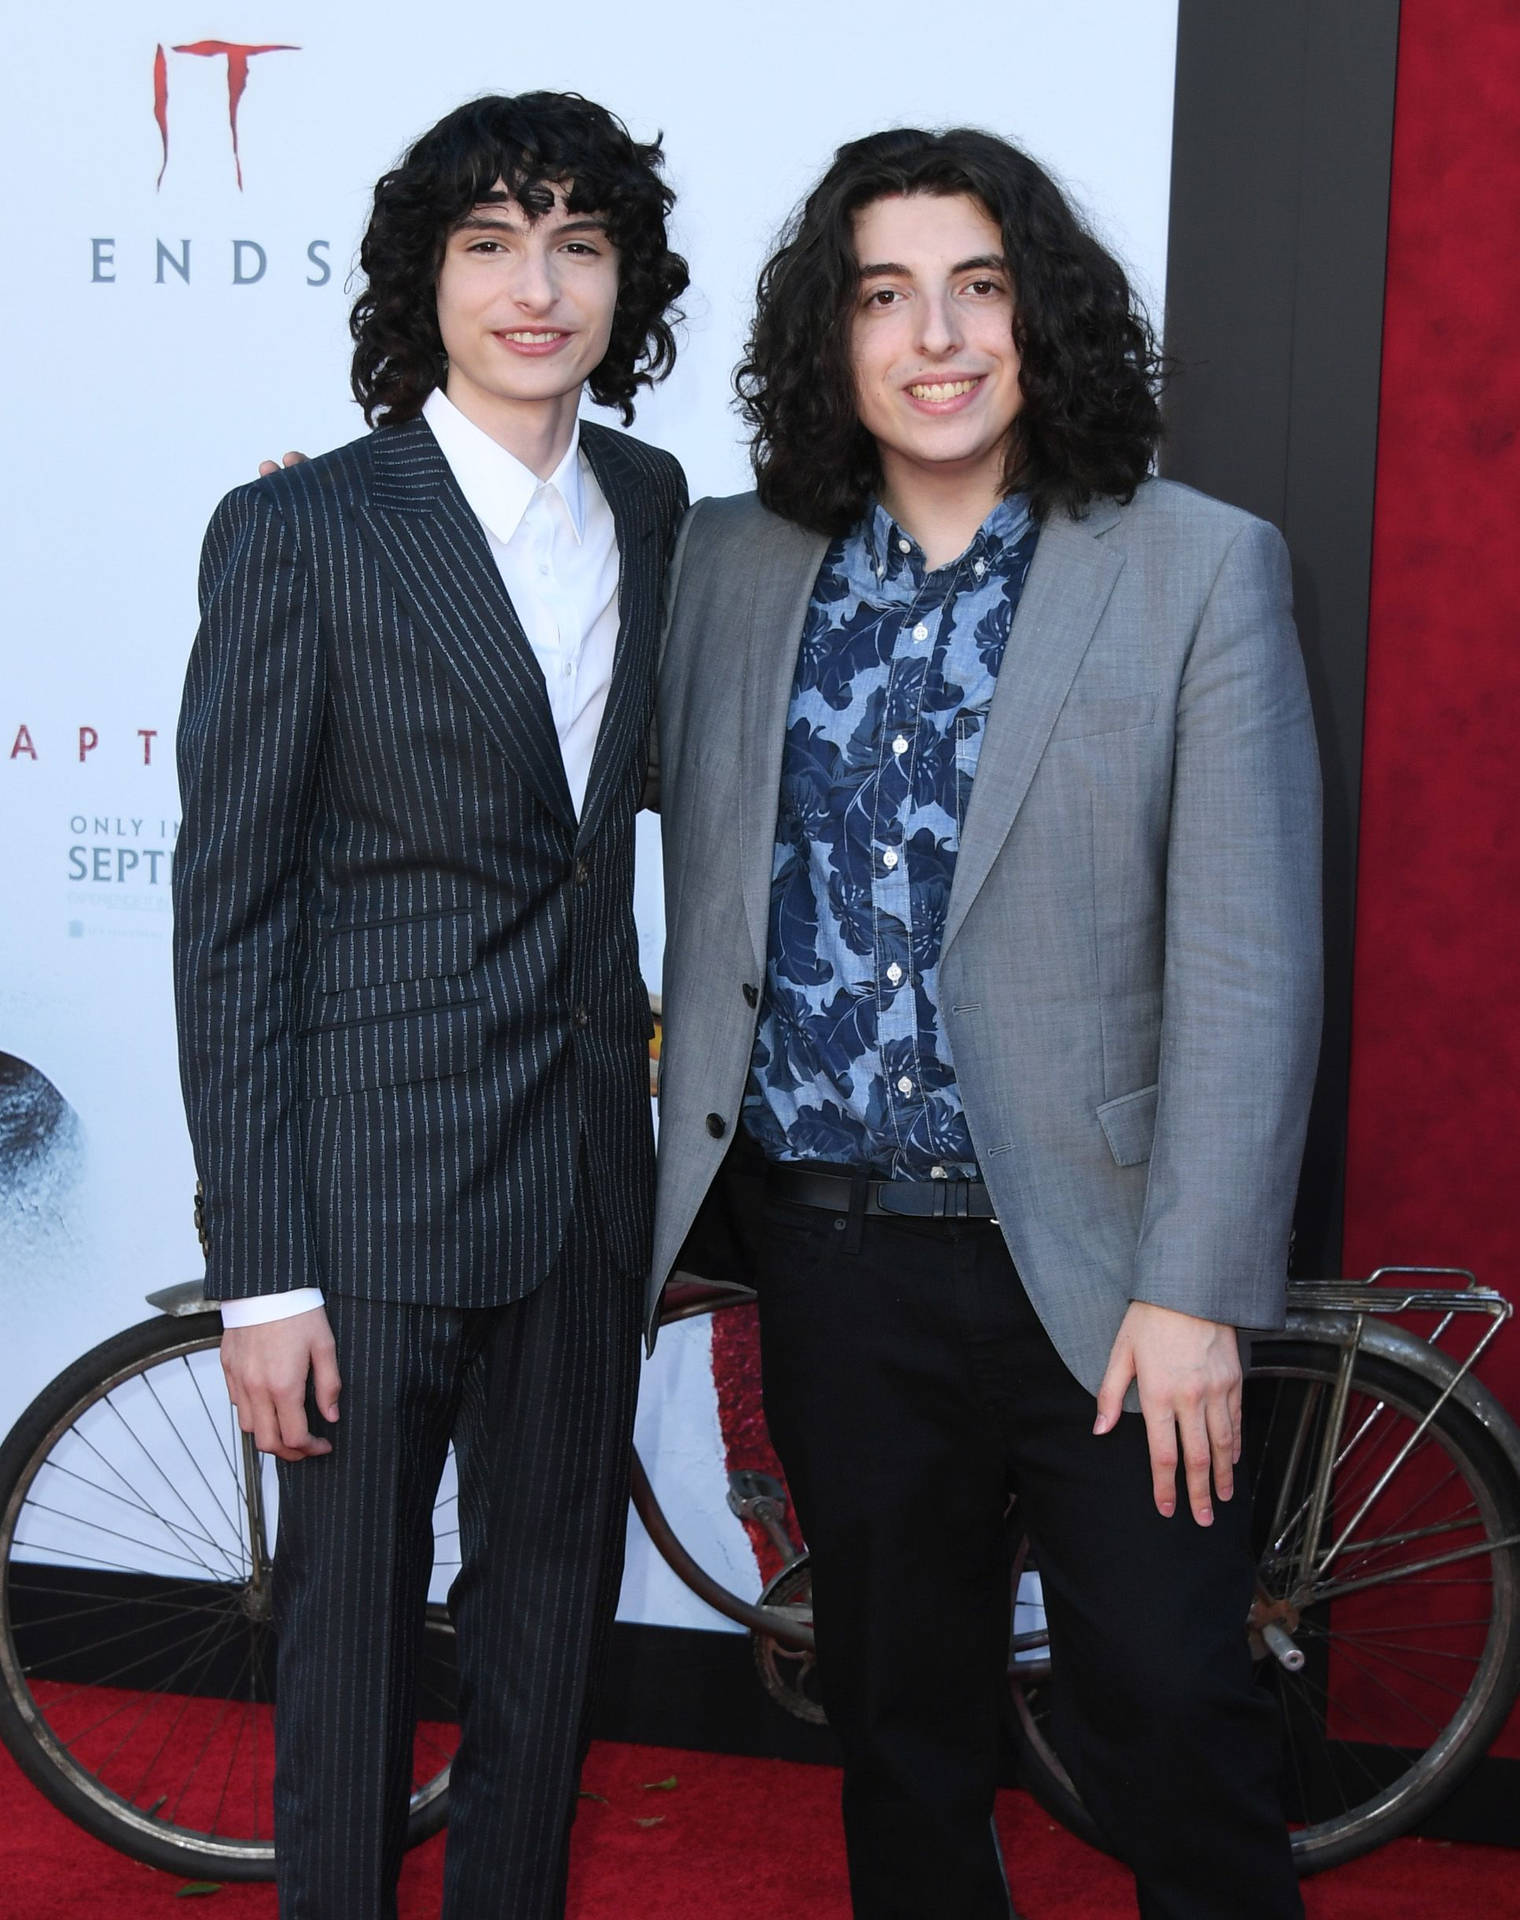 Finn Wolfhard And It Co-actor